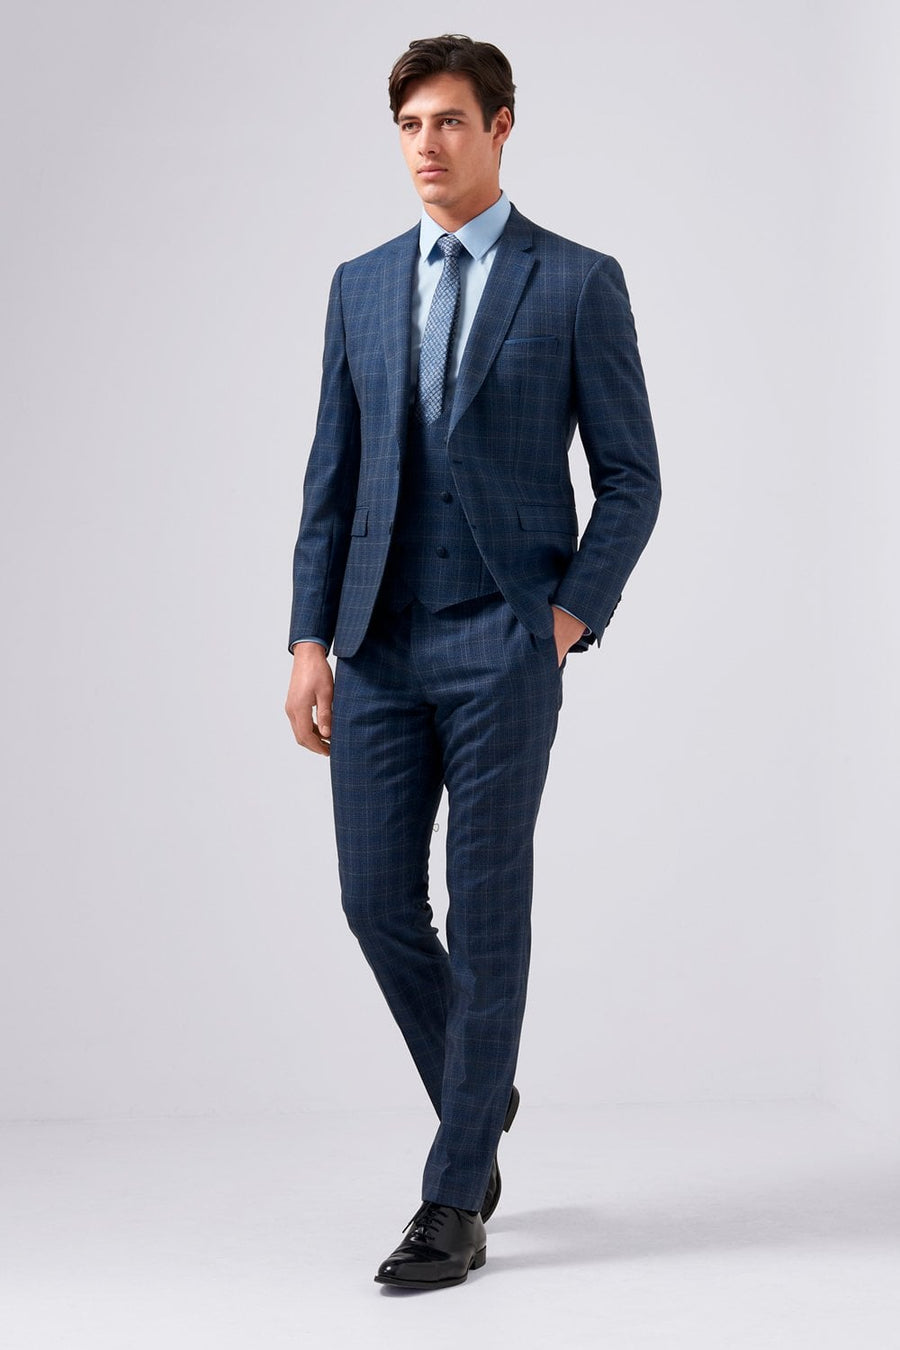 Buy the Remus Uomo 41095 Suit in Blue at Intro. Spend £50 for free UK delivery. Official stockists. We ship worldwide.